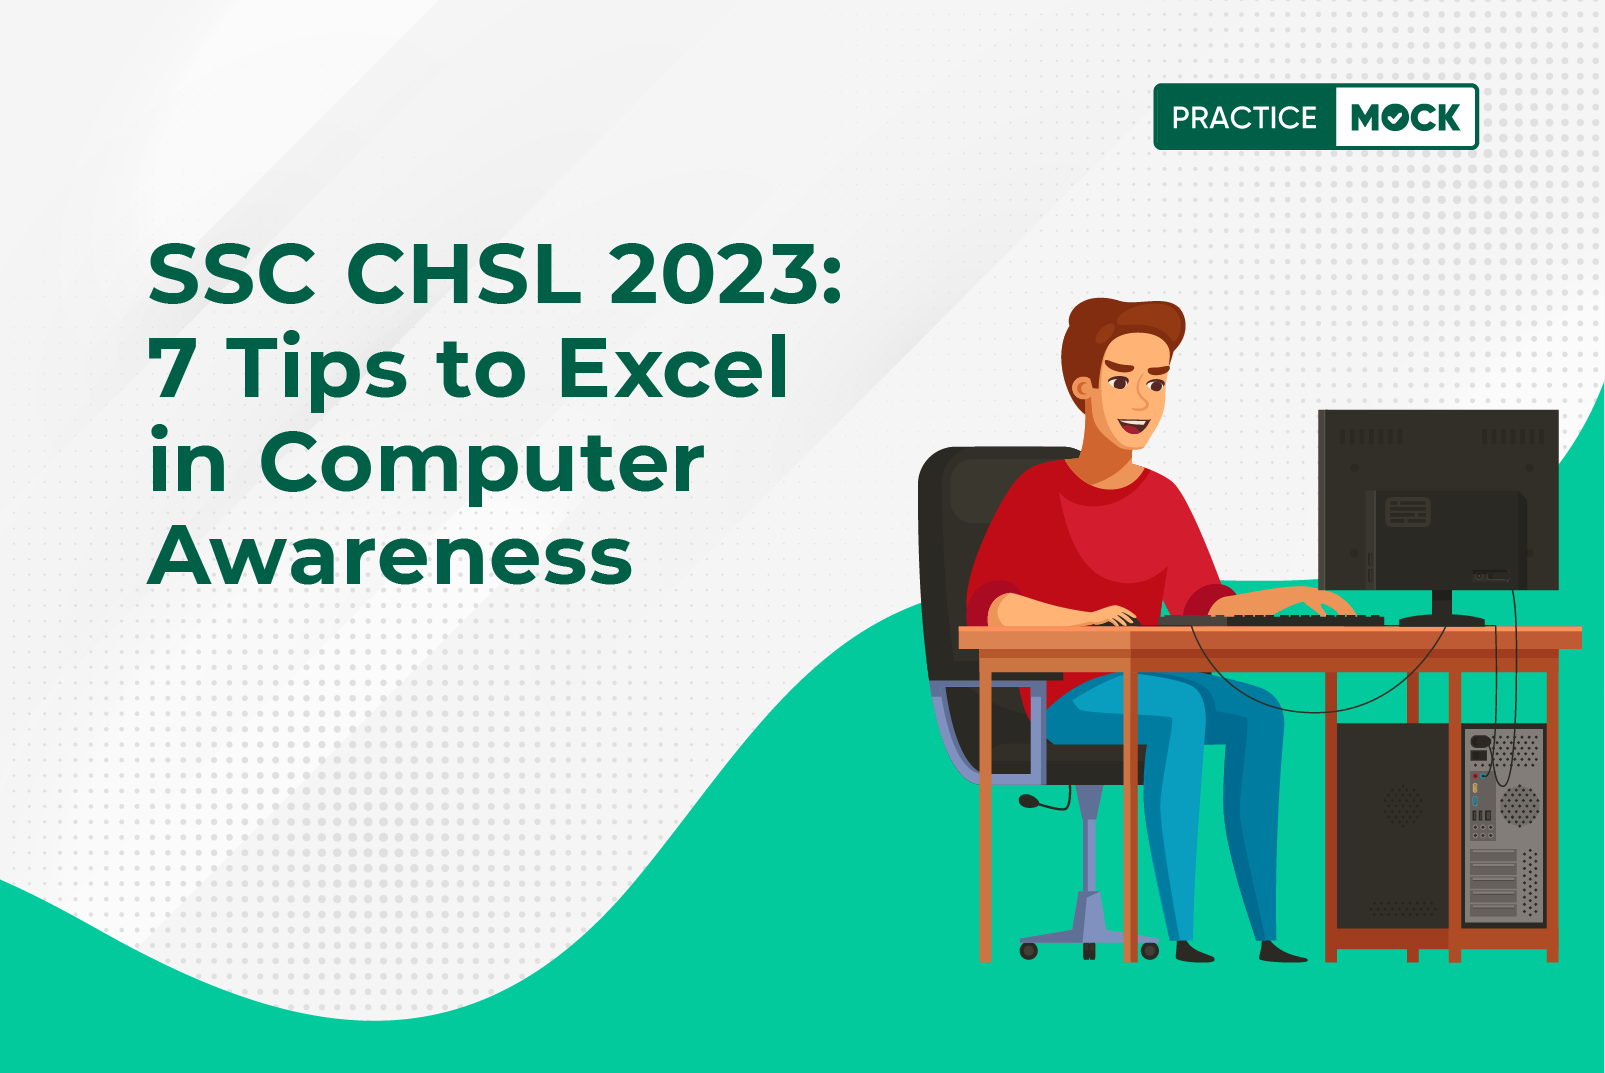 SSC CHSL 2023 7 Tips to Excel in Computer Awareness